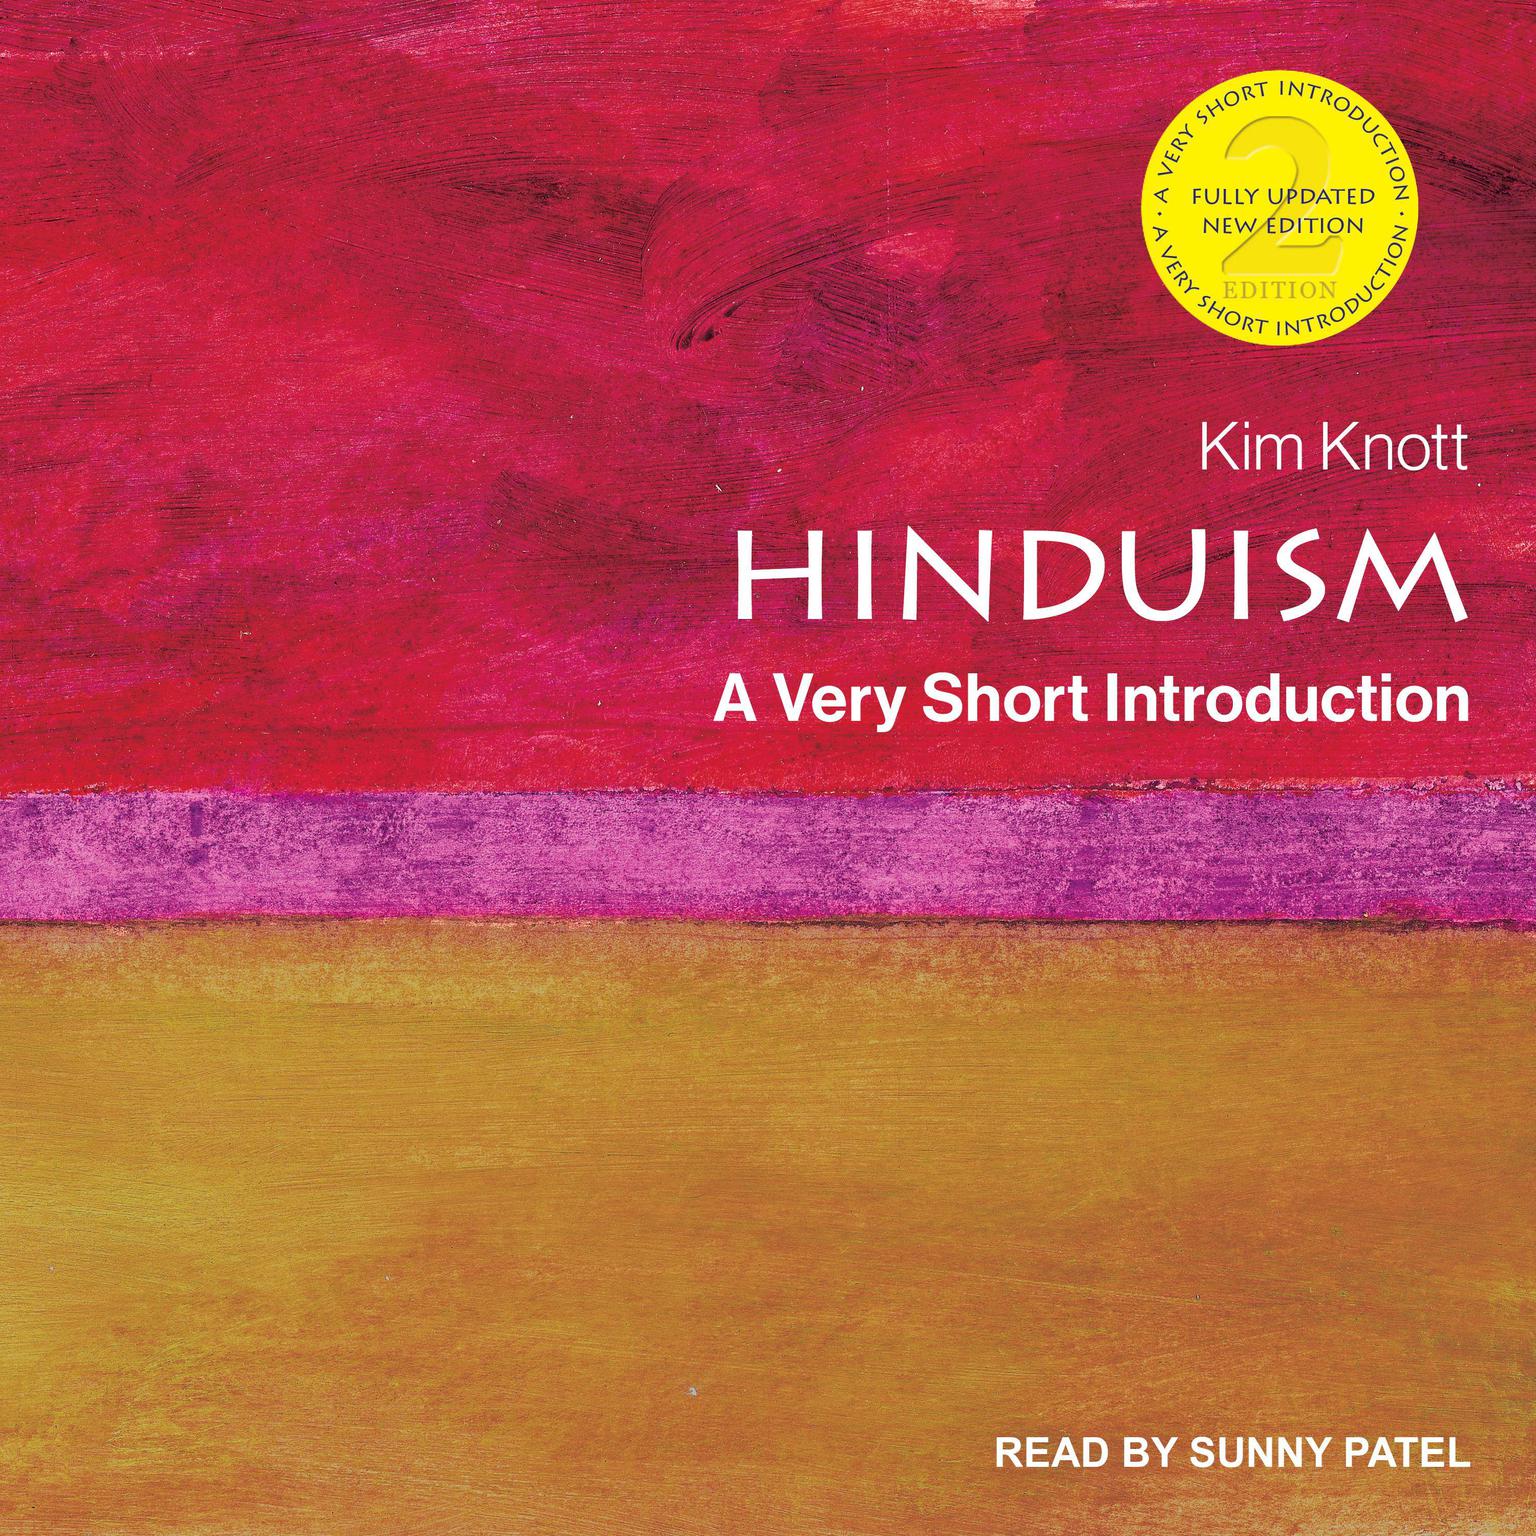 Hinduism: A Very Short Introduction, 2nd Edition Audiobook, by Kim Knott